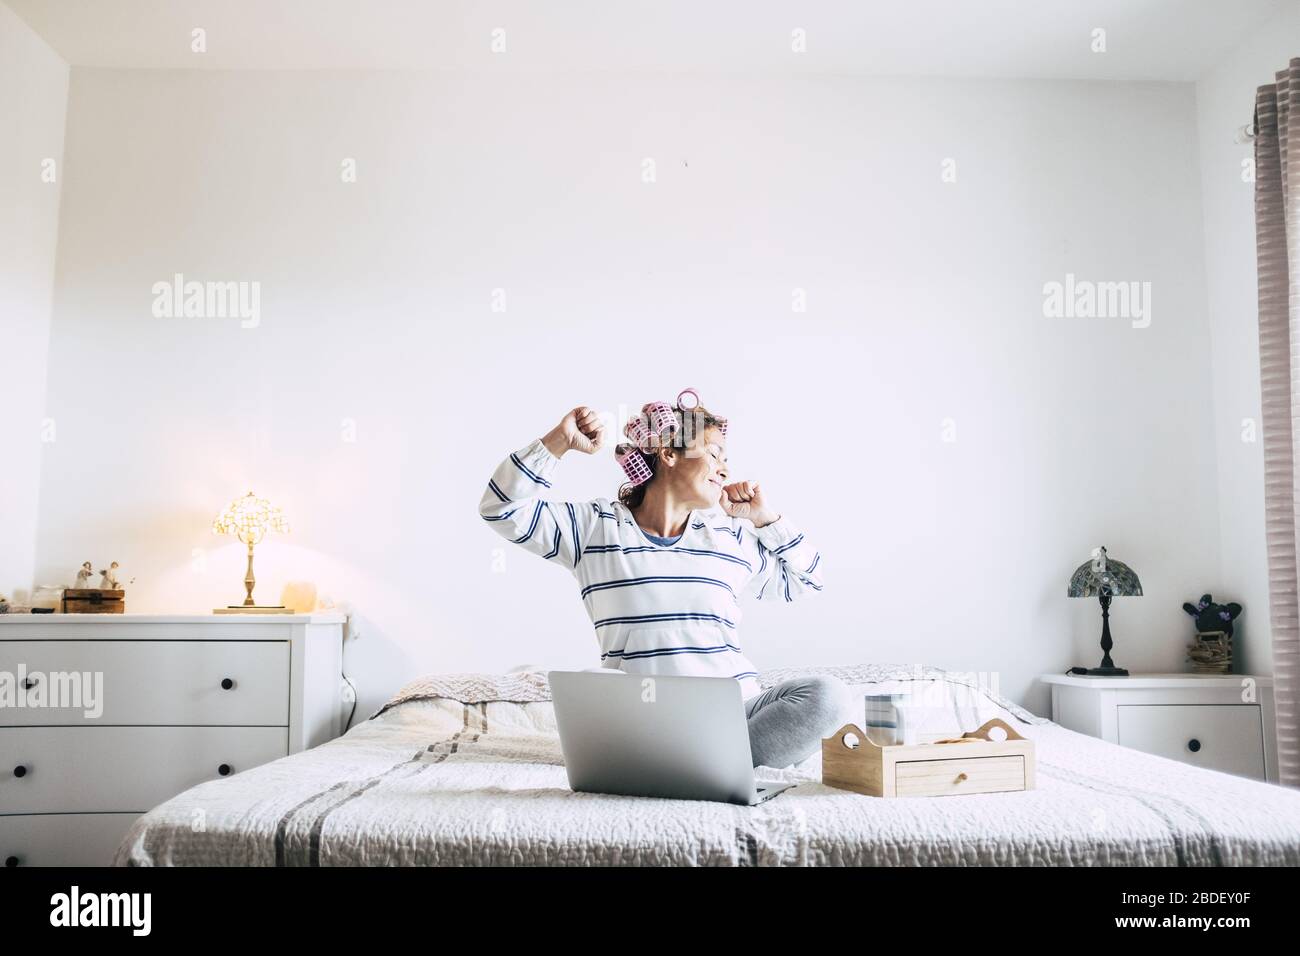 Woman sitting on bed with laptop and stretching Stock Photo